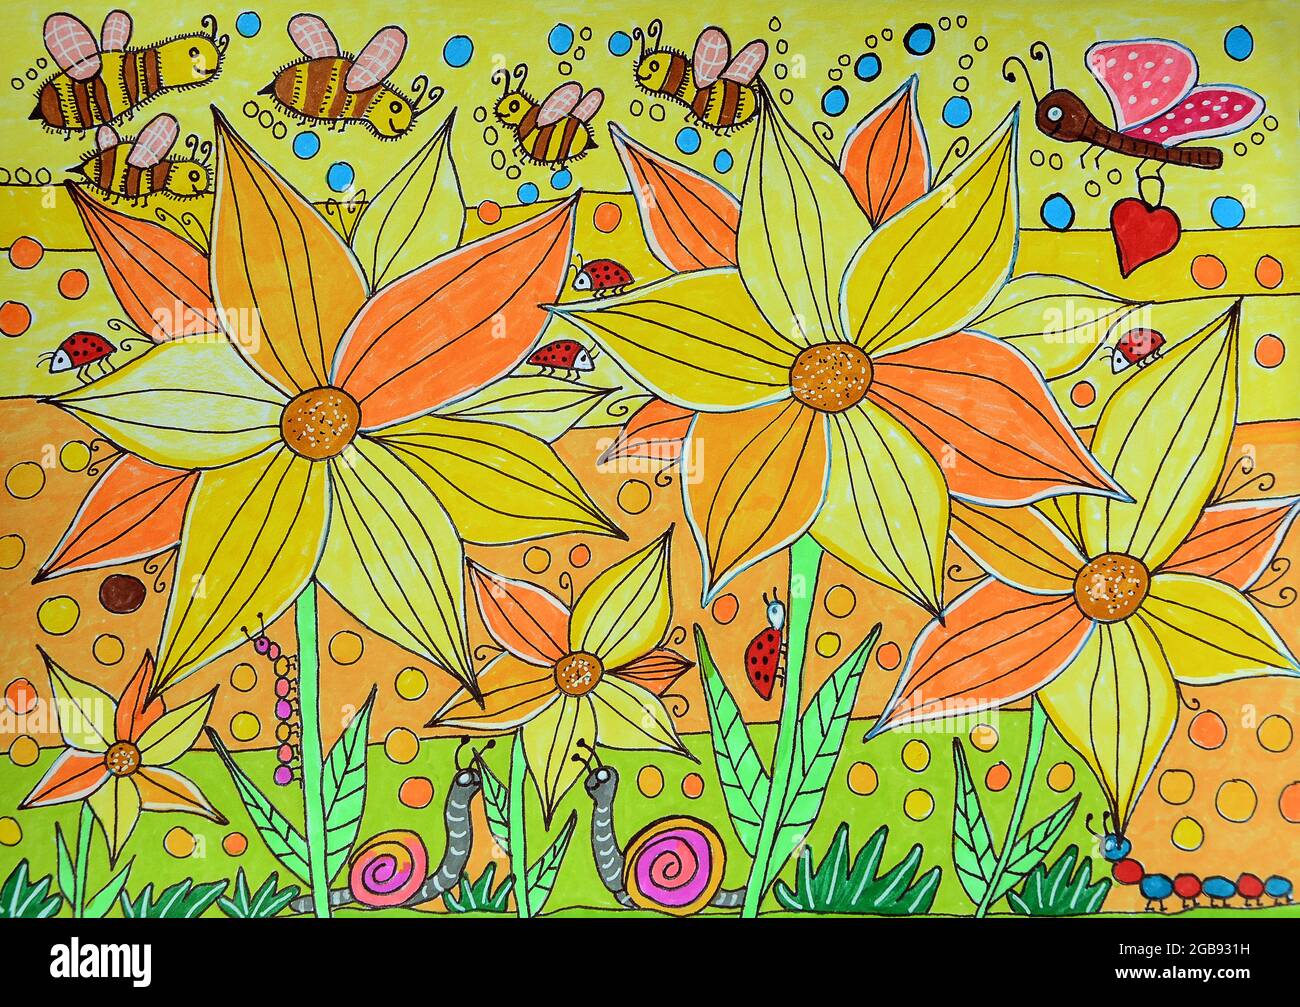 Sunflowers and bees, naive illustration Stock Photo